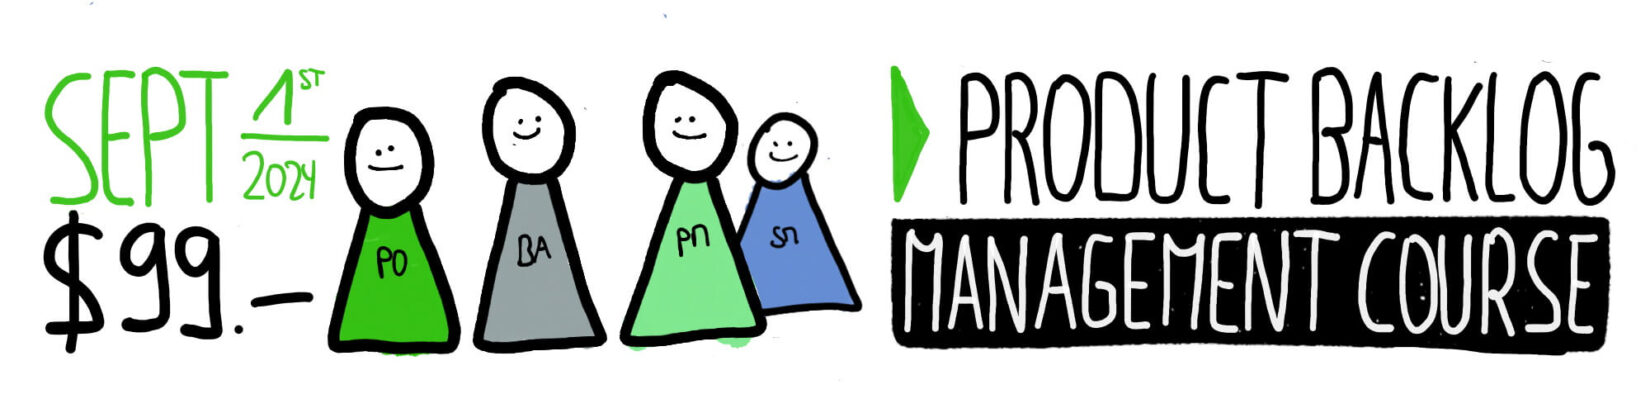 Join the Advanced Product Backlog Management Course by Stefan Wolpers — Berlin-Product-People.com